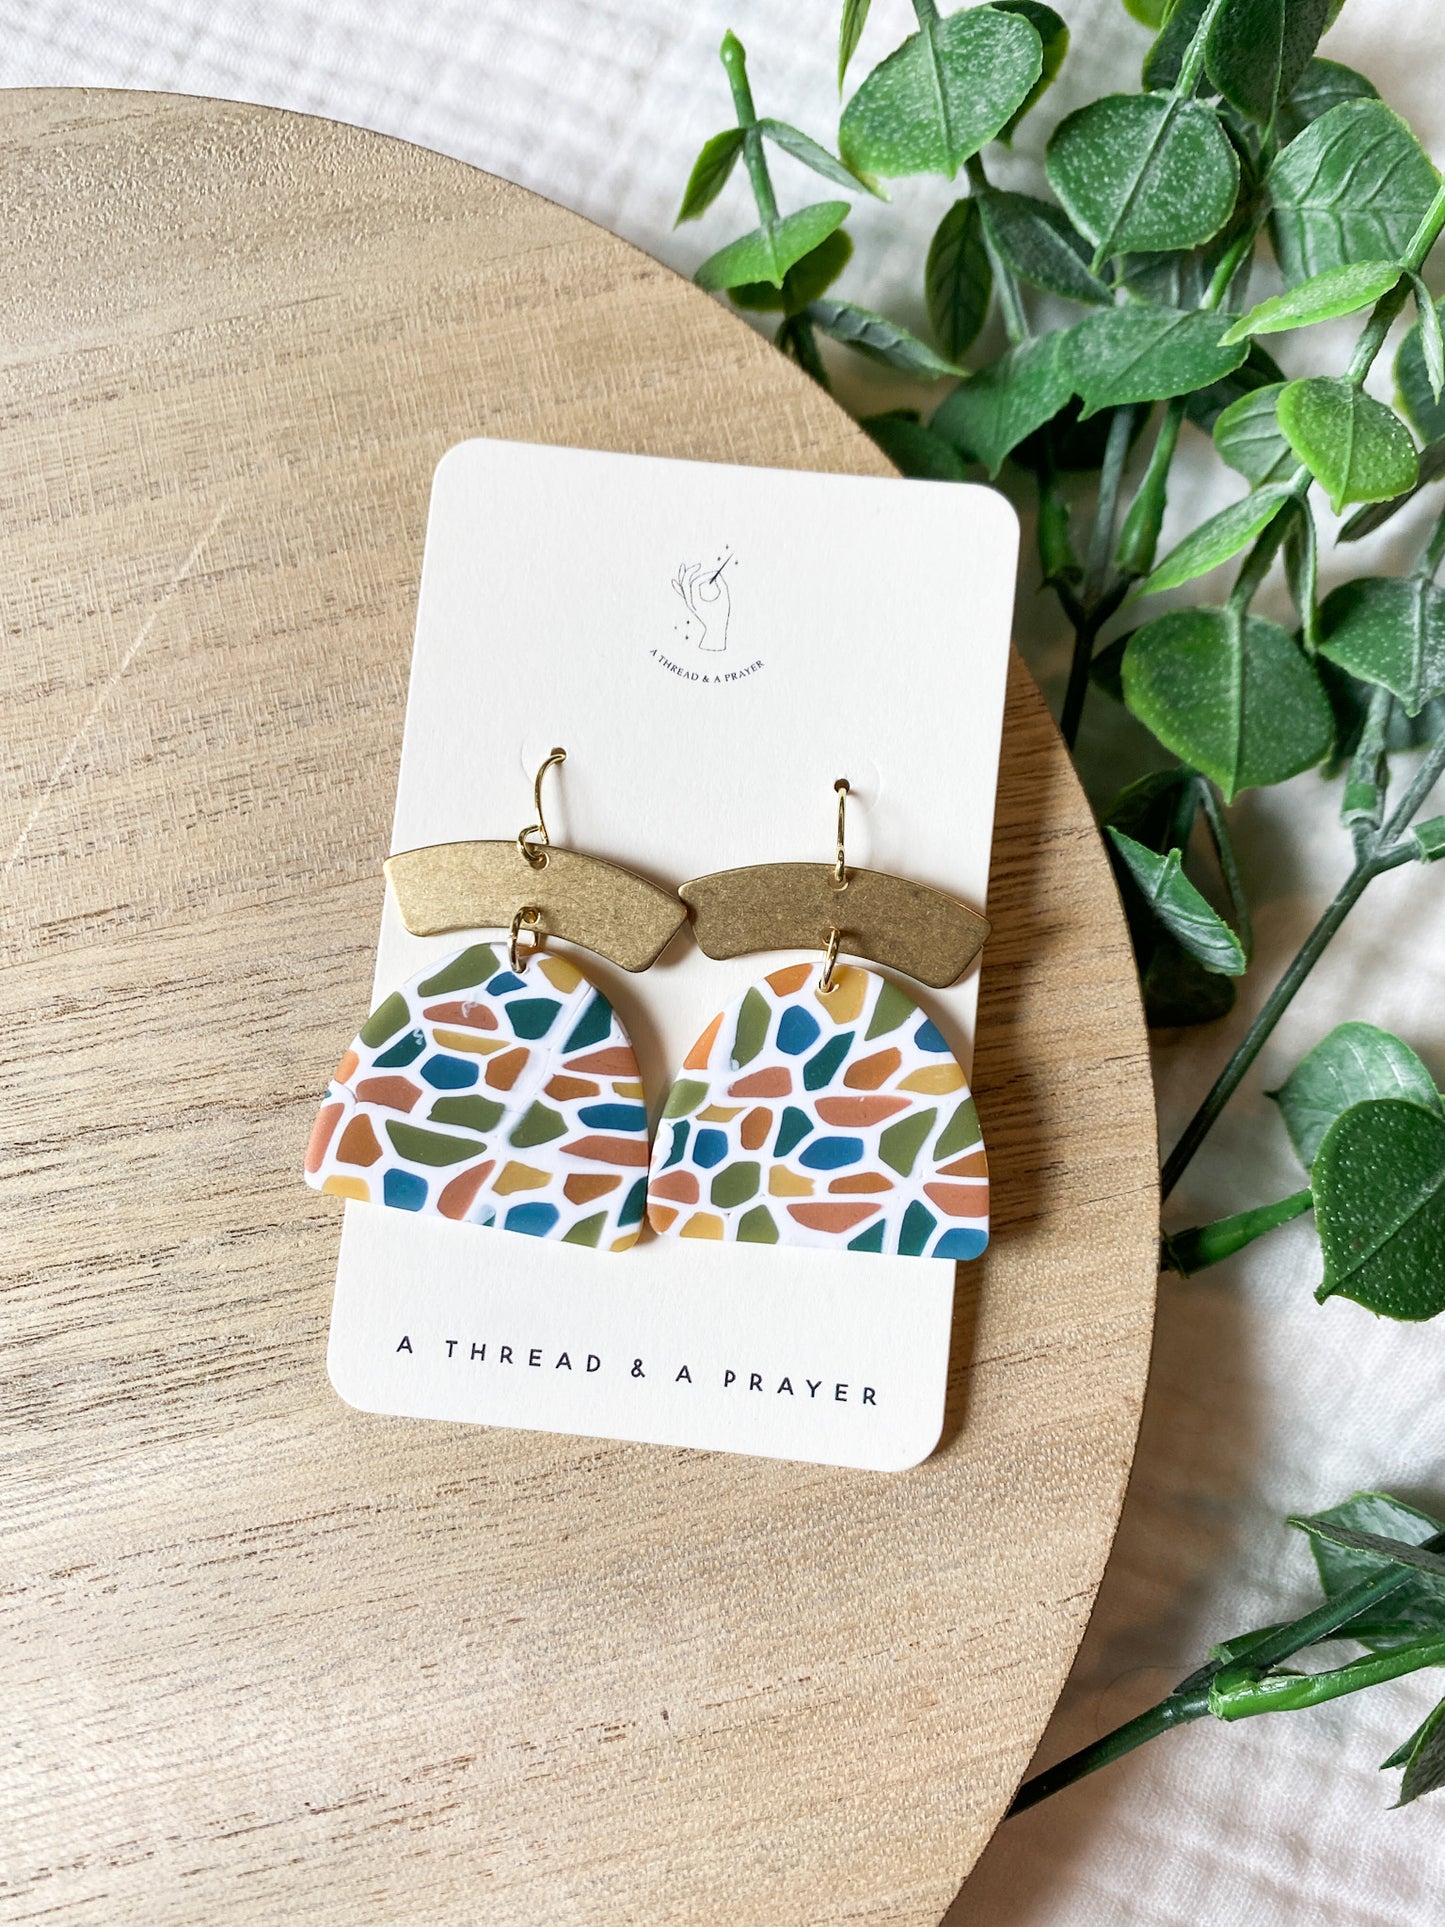 Cute Stained Glass Clay Dangle Earrings | Polymer Clay and Metal Accent | Lightweight Earrings